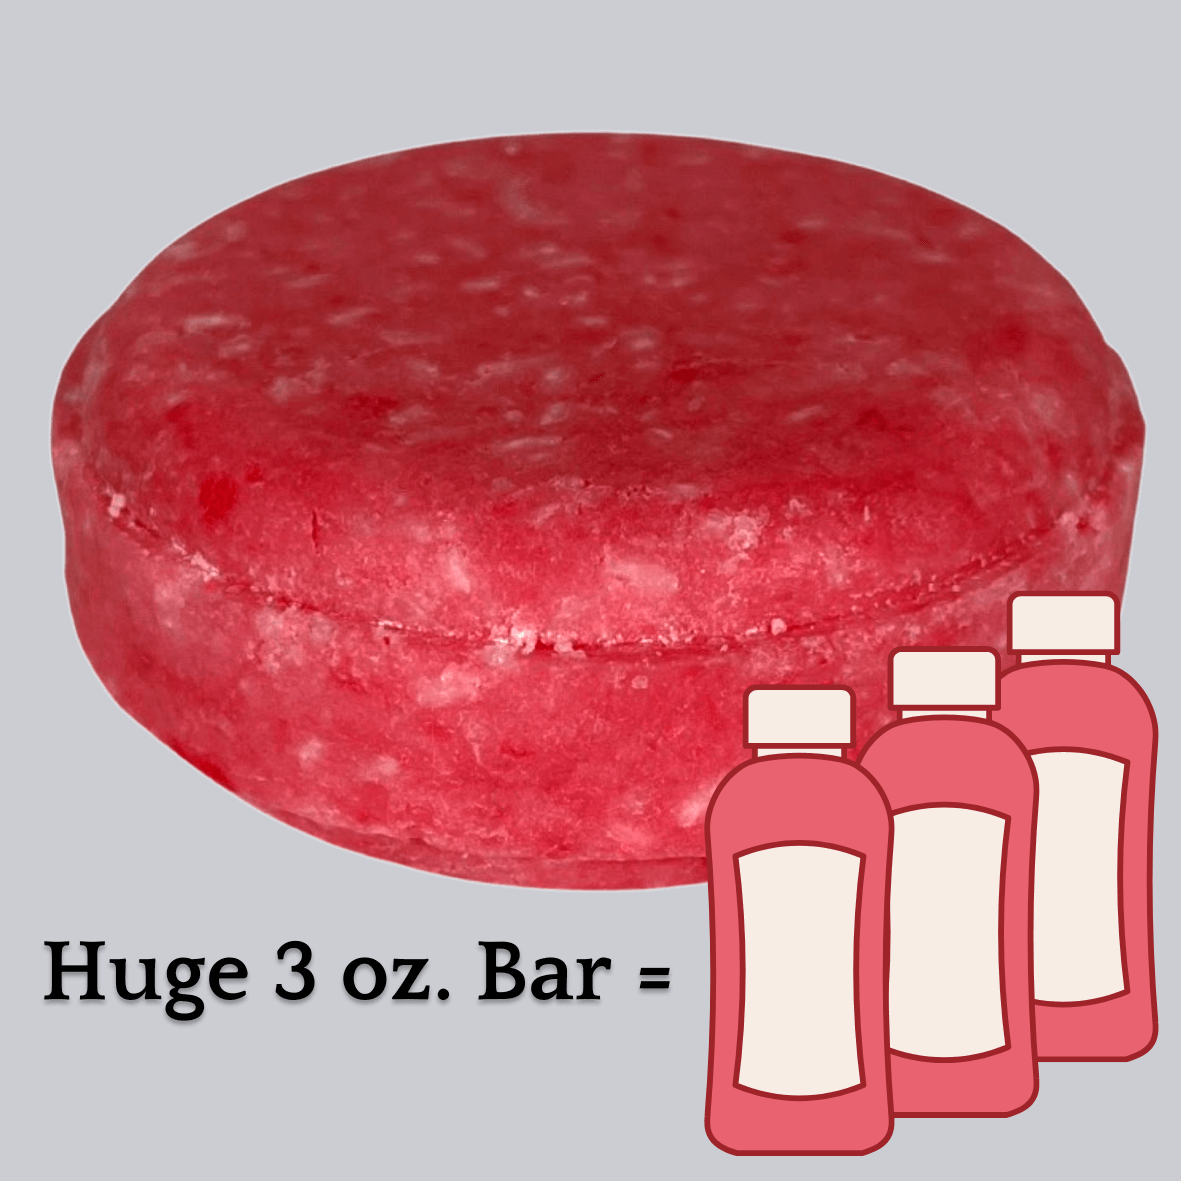 Hot pink Femme Fatale shampoo bar with text below: "Huge 3 Ounce Bar" equals icon of three bottles of shampoo. Alpaca Soaps AlpacaSoaps